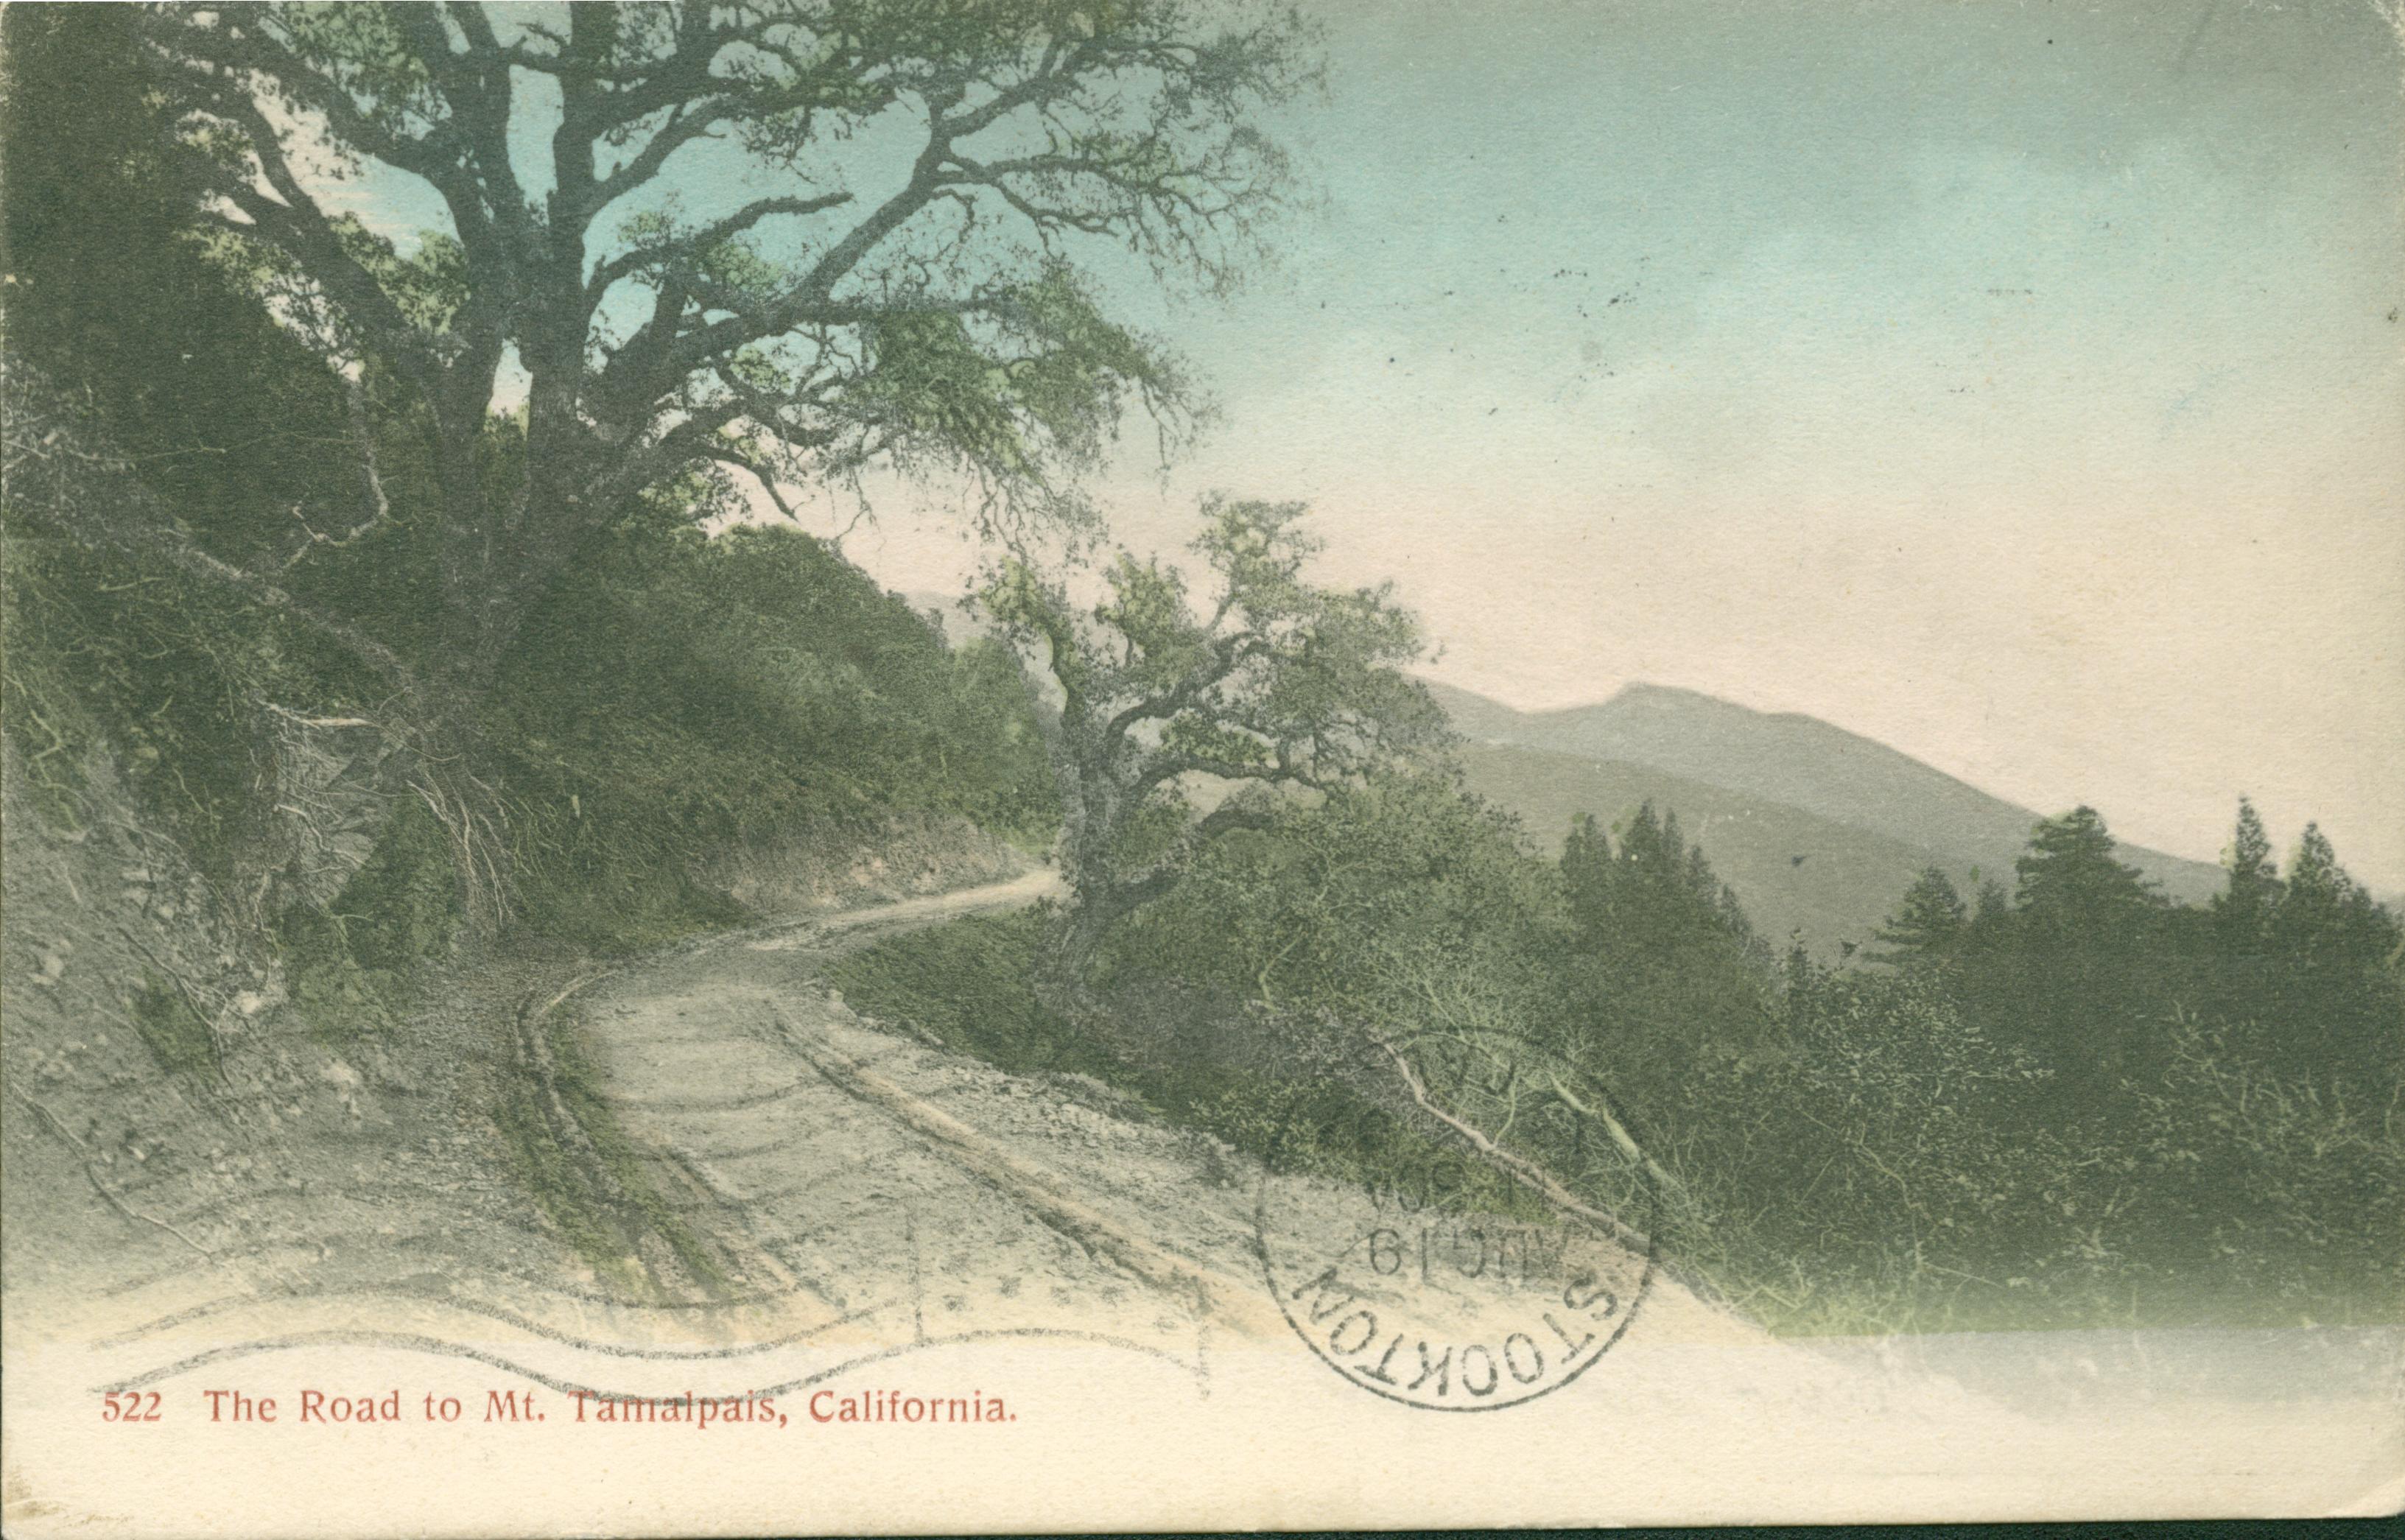 The road to Mt. Tamalpais, mountains and trees surround the road